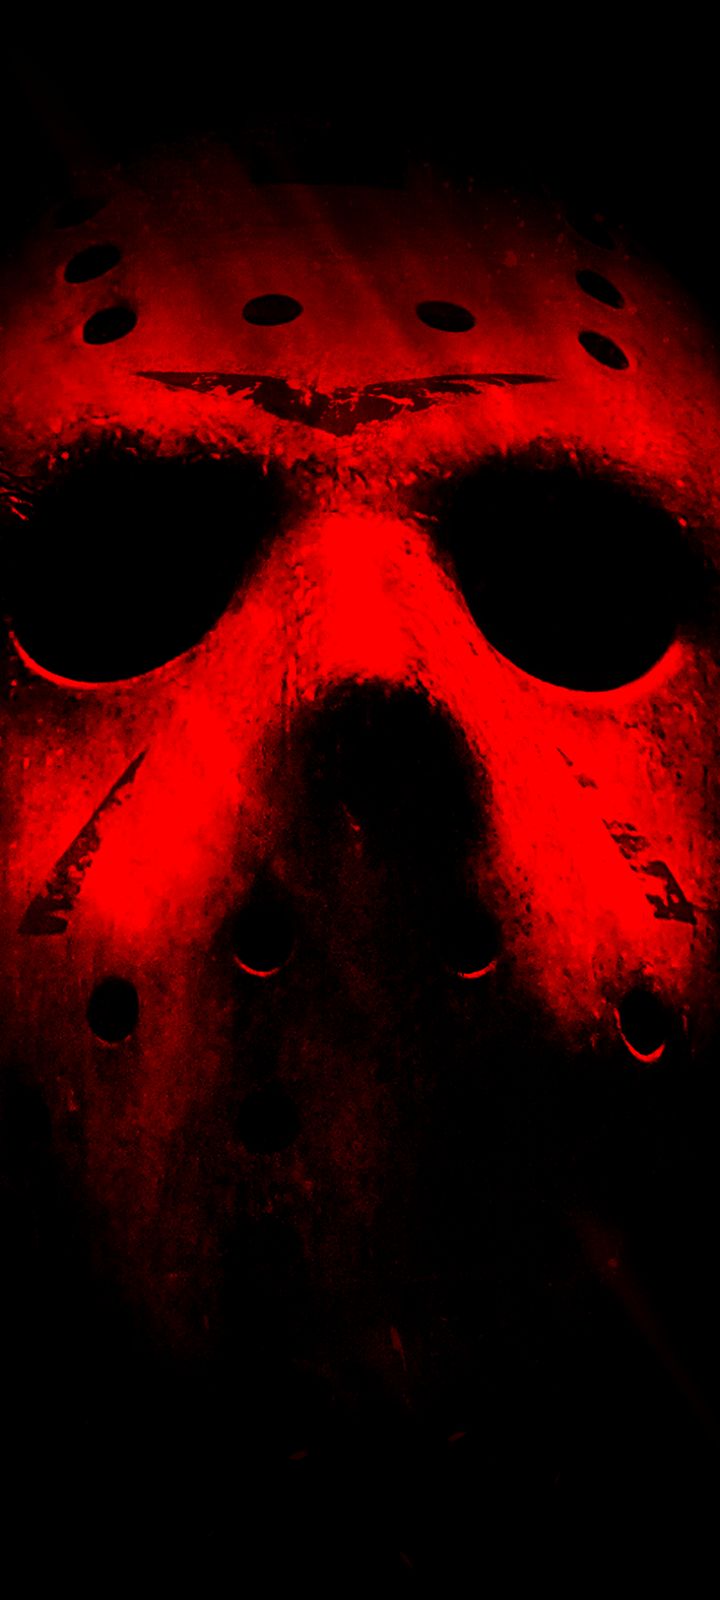 movie, friday the 13th (2009), jason voorhees, friday the 13th cellphone